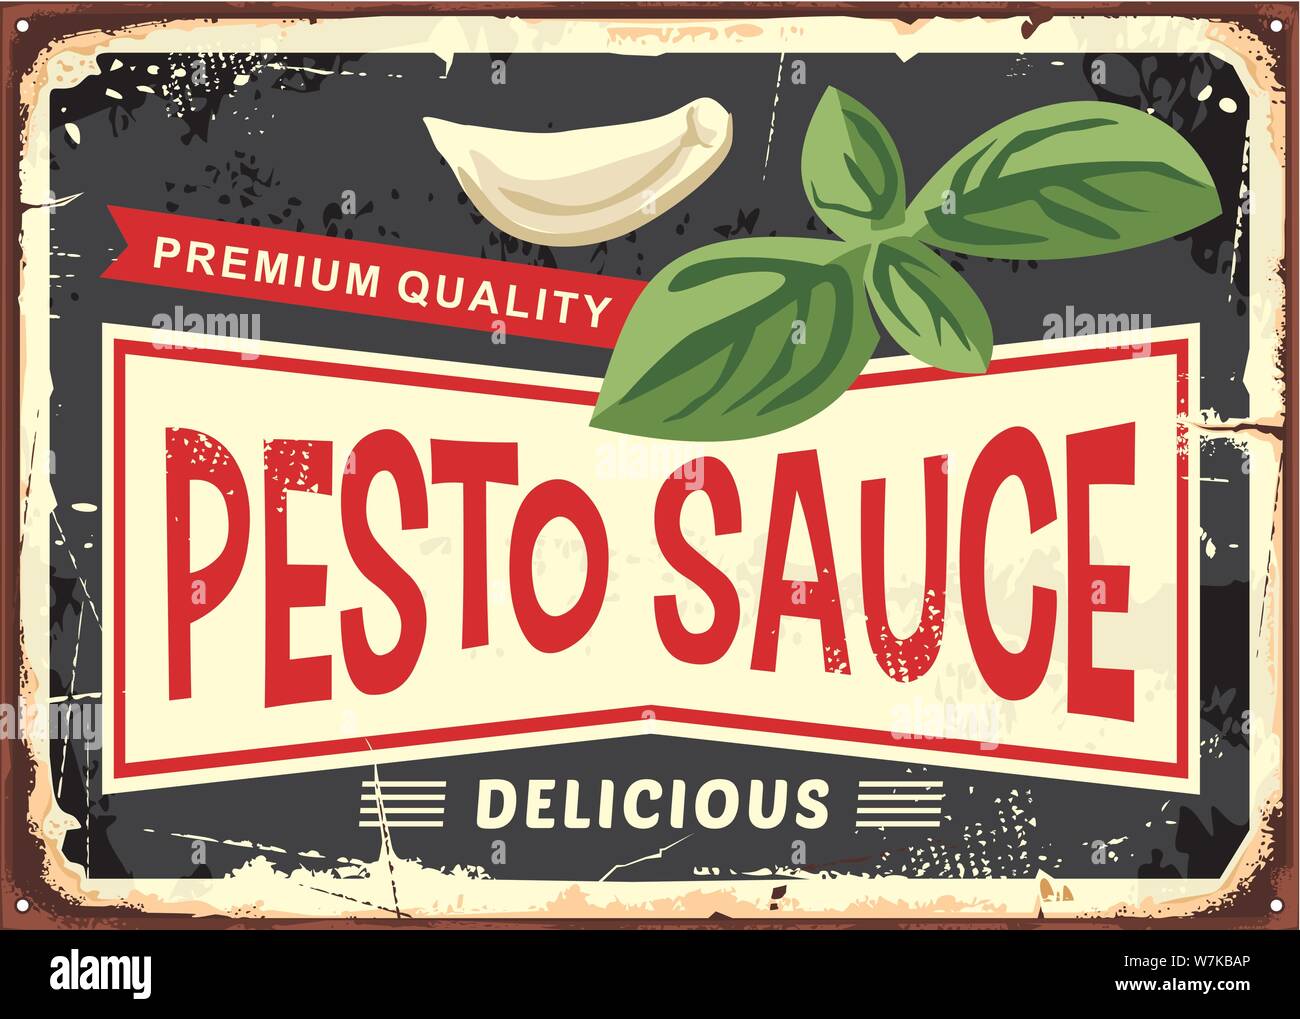 Pesto sauce vintage sign. Delicious food ingredient with basil and garlic. Vector image. Stock Vector